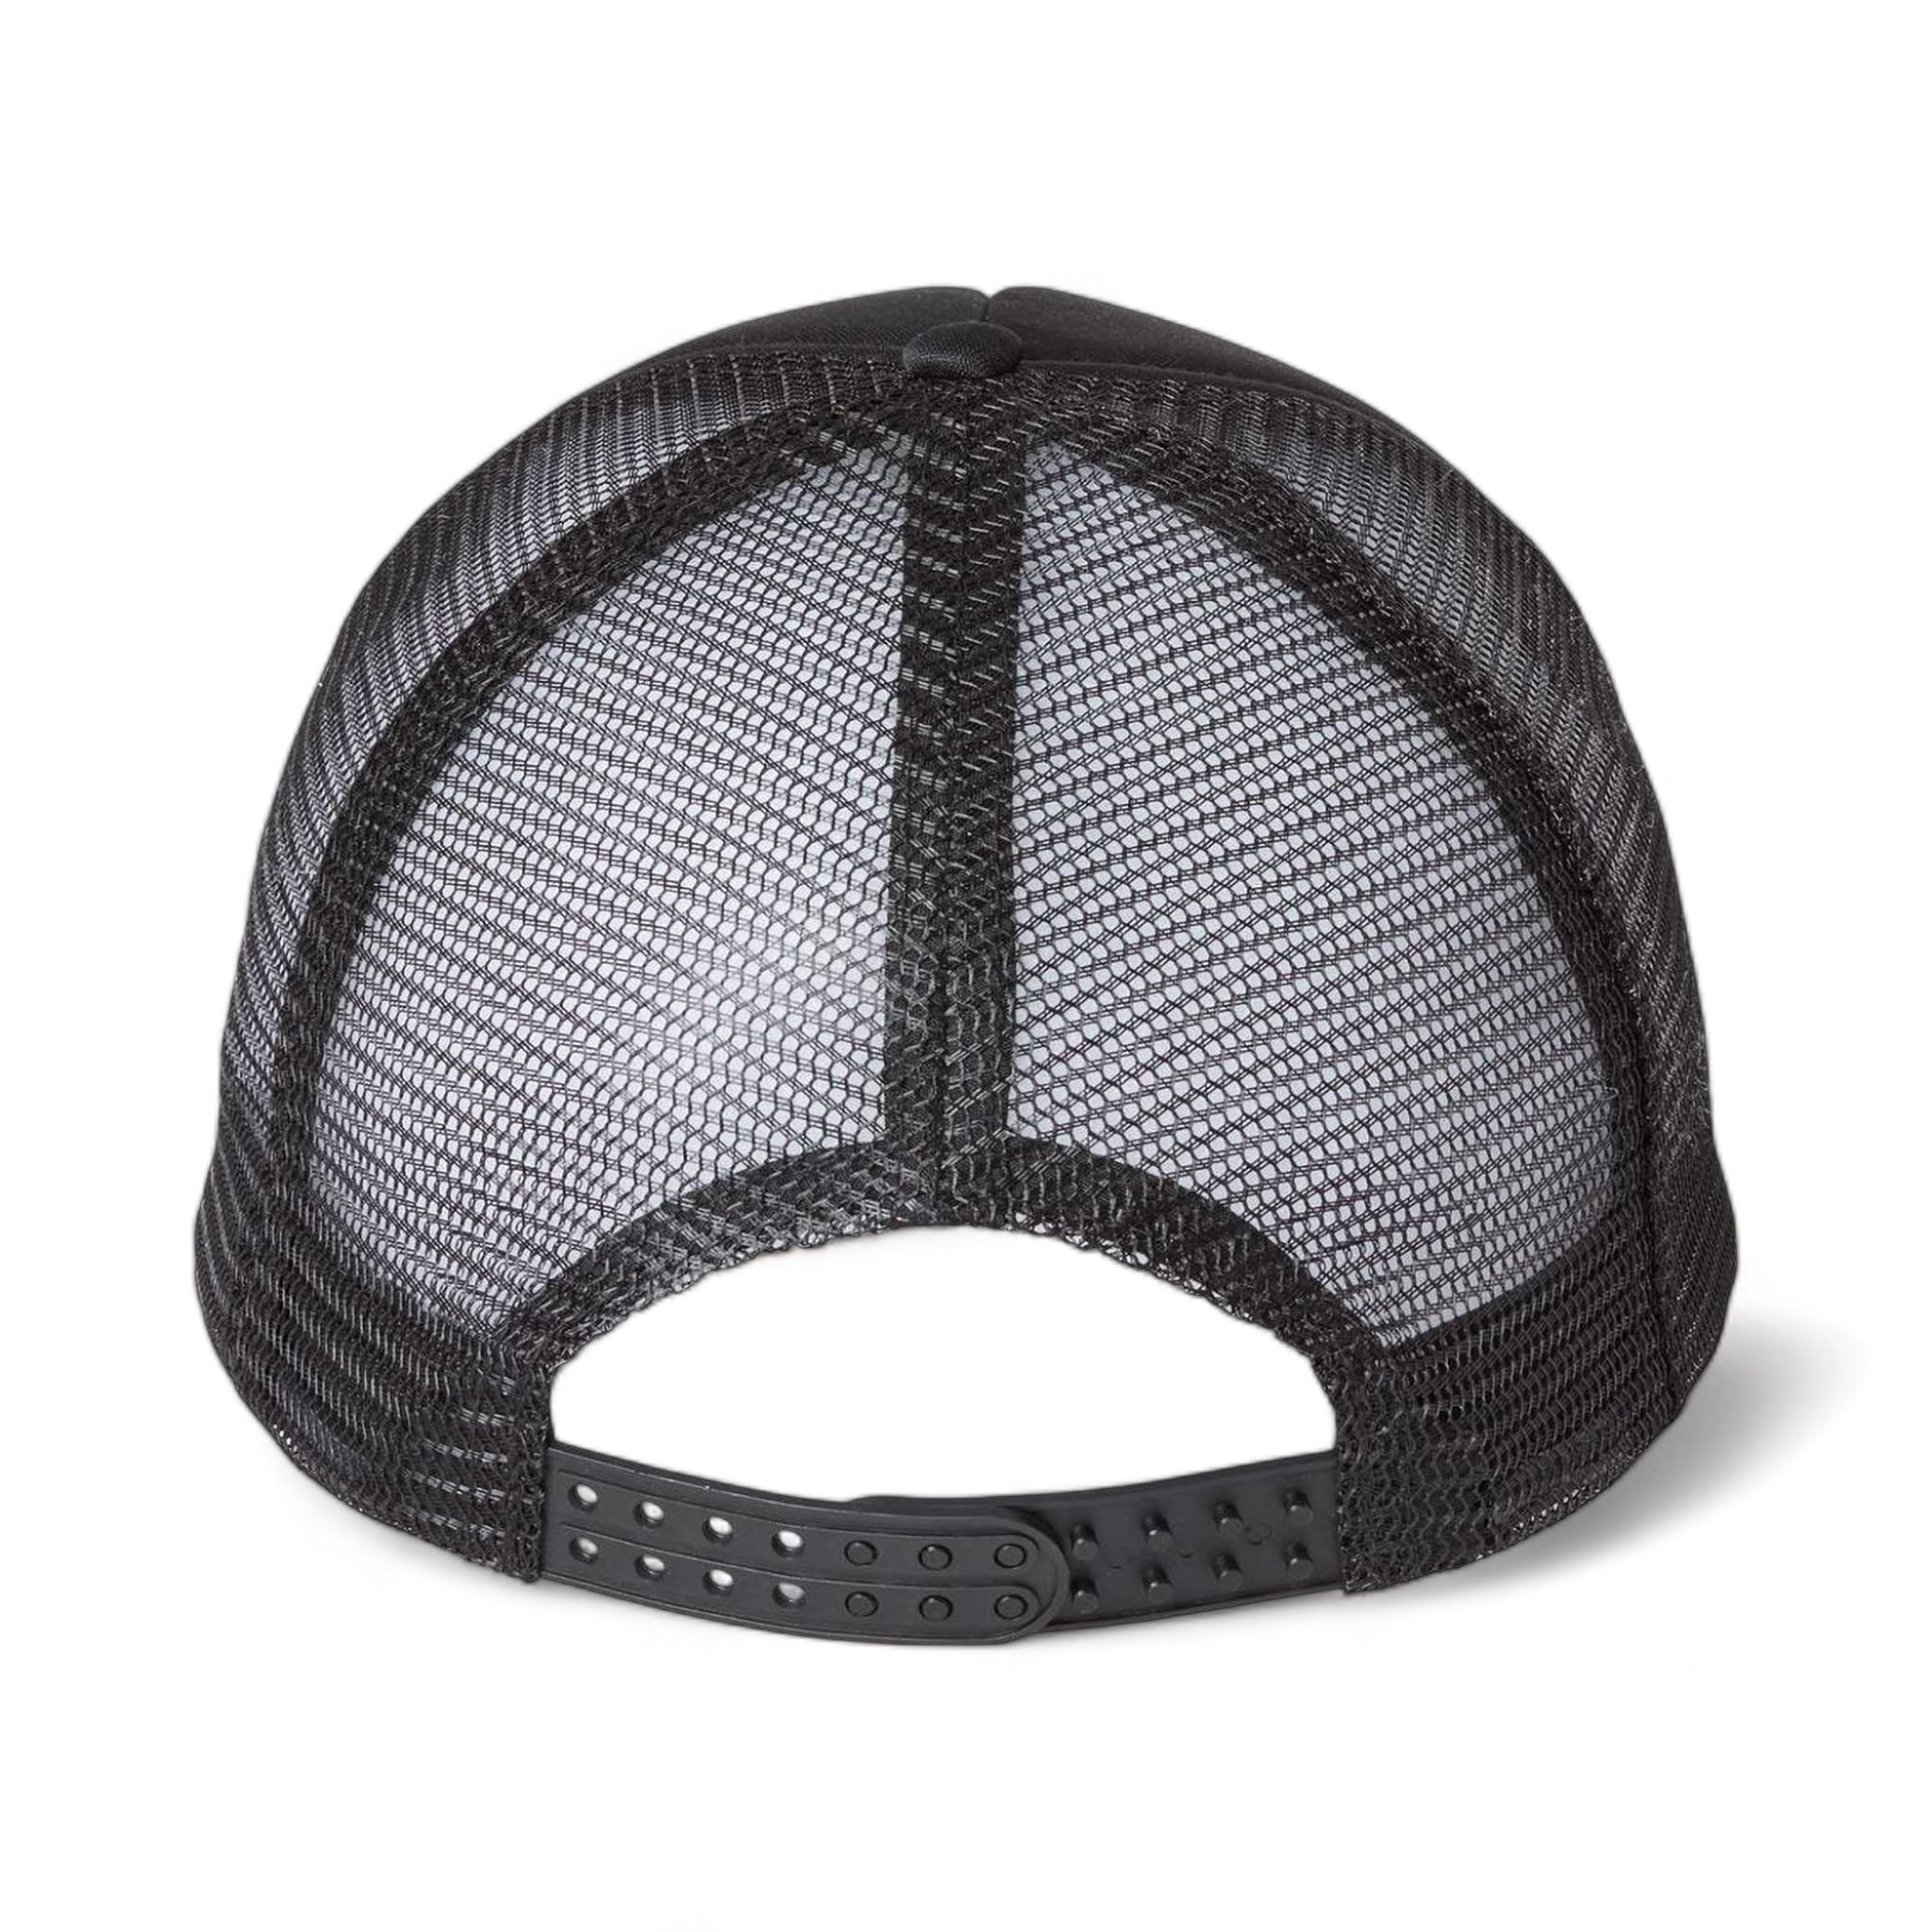 Back view of Valucap VC700 custom hat in black and black